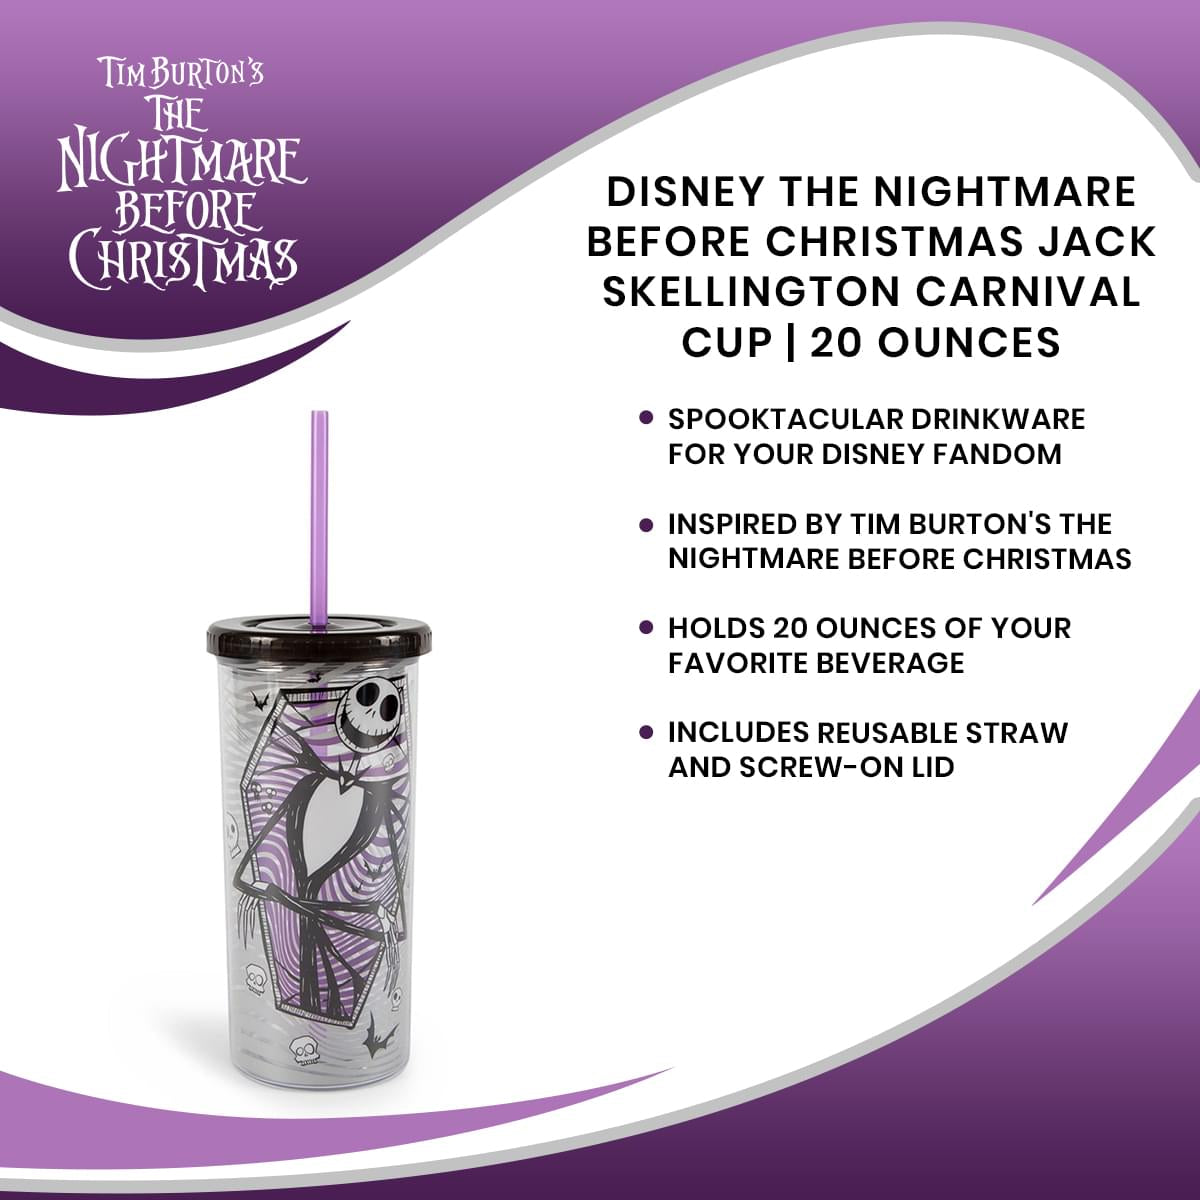 Disney The Nightmare Before Christmas Jack Skellington Carnival Cup | 20 Ounces